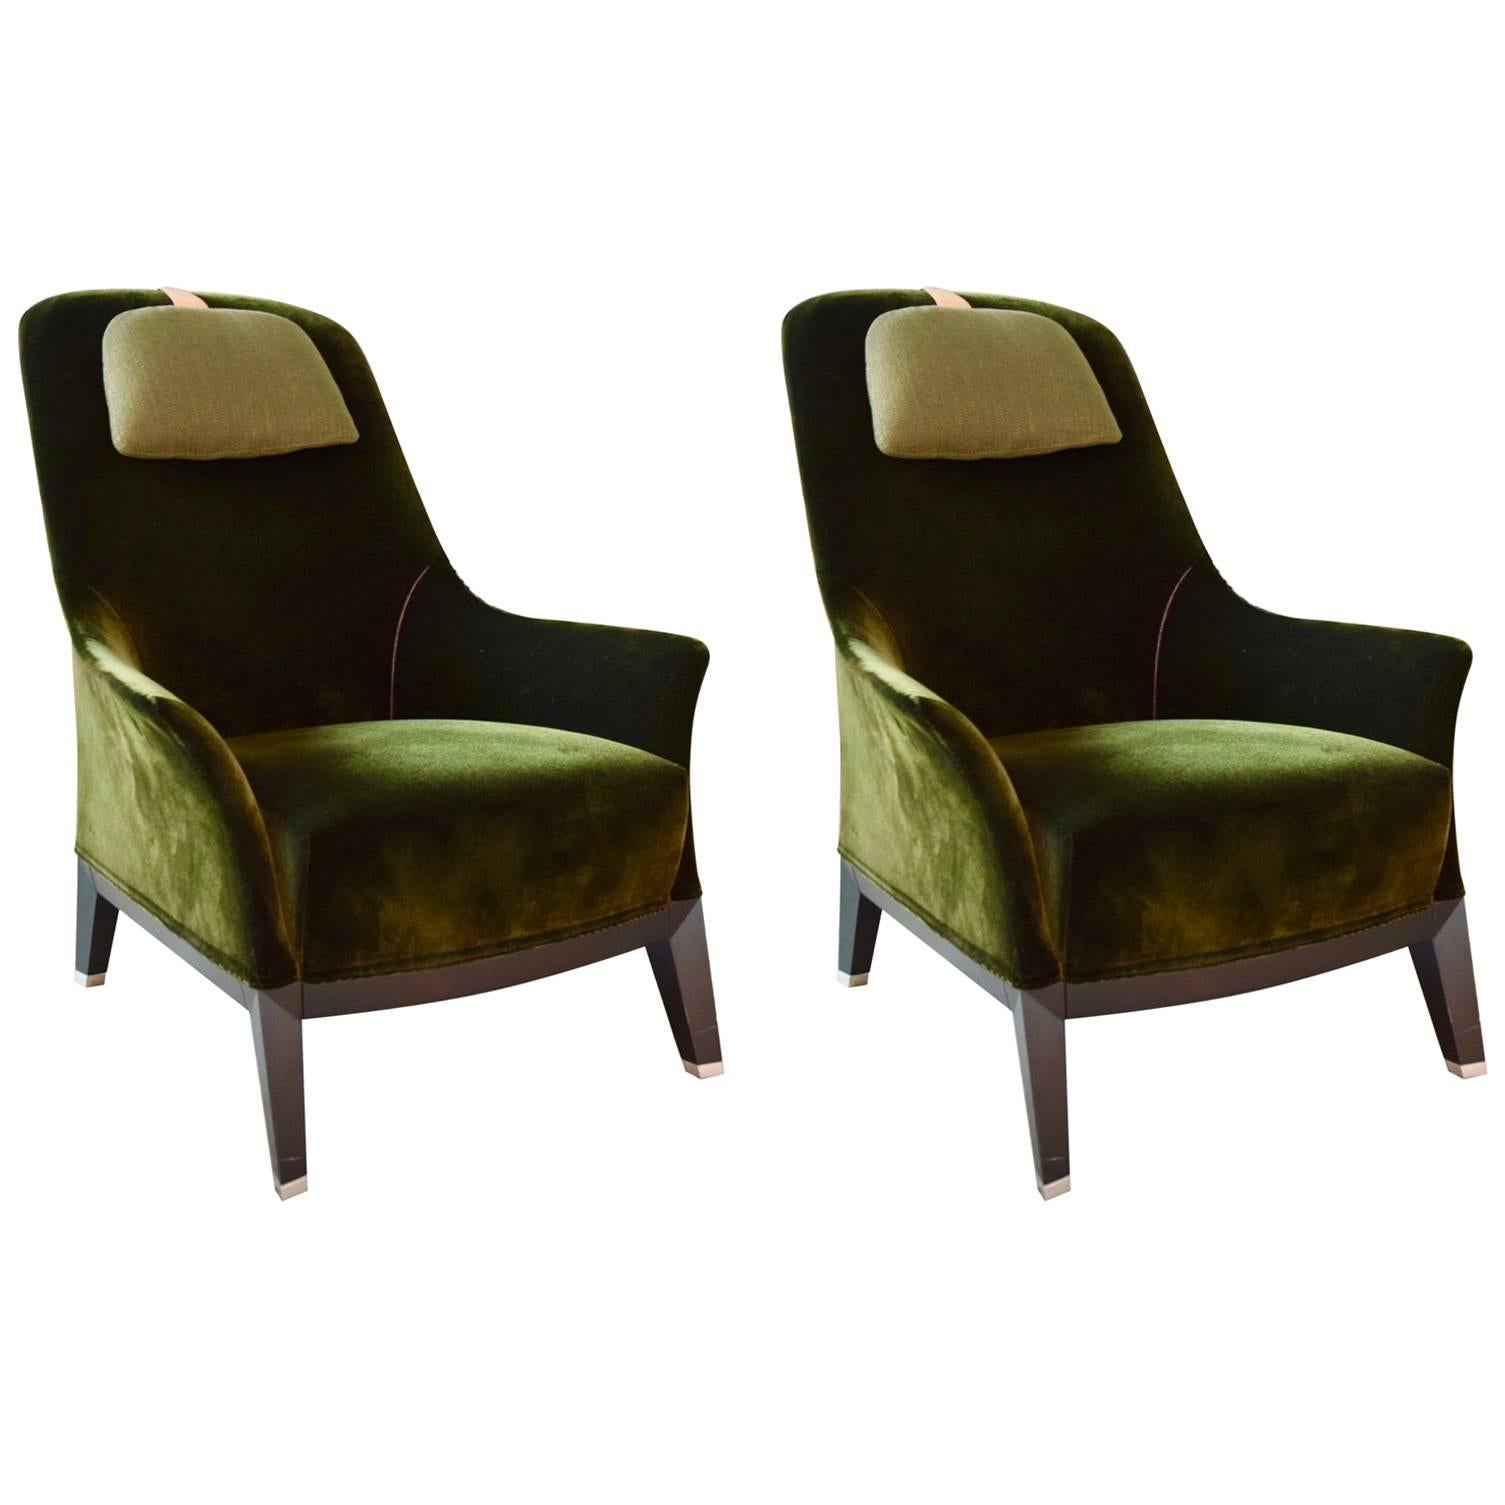 Pair of Normal Wing Chairs by Massimo Scolari for Giorgetti